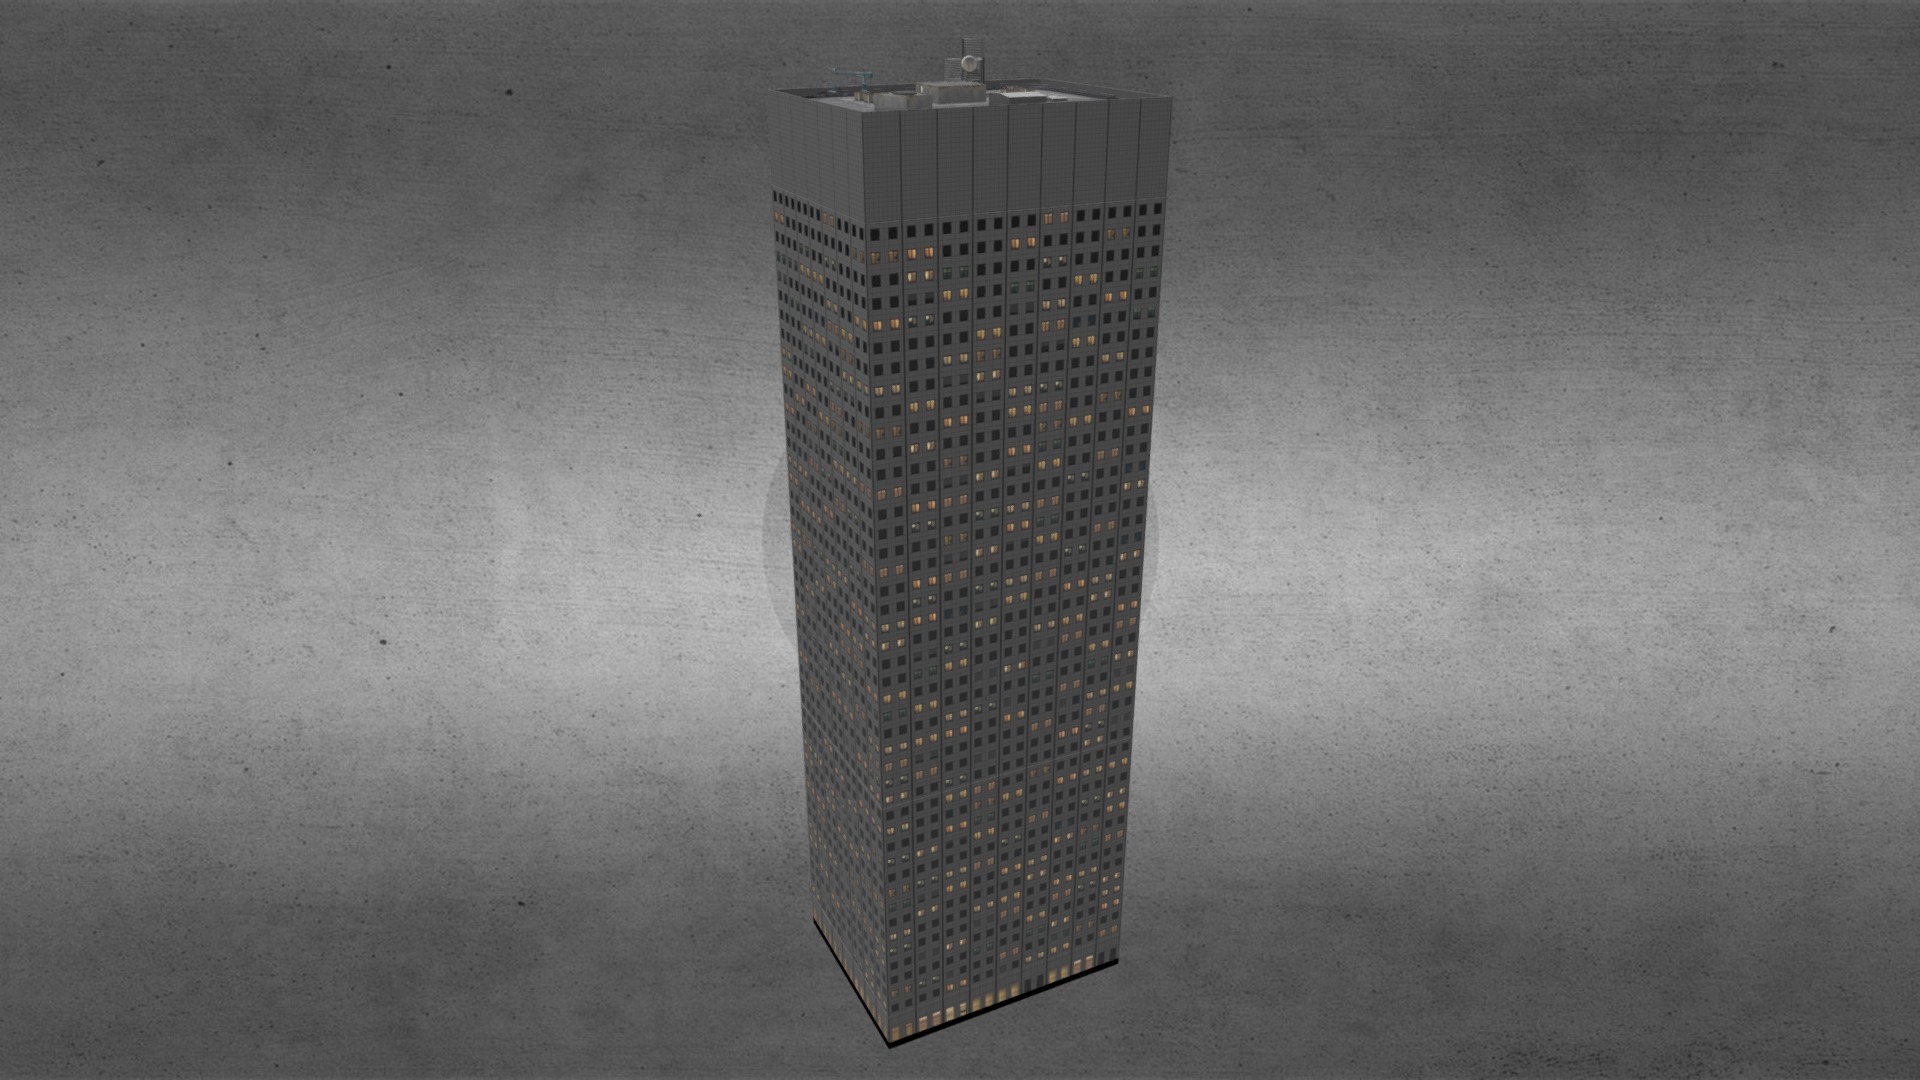 3D model Areva Tower – La défense / Paris - This is a 3D model of the Areva Tower - La défense / Paris. The 3D model is about a tall black tower.